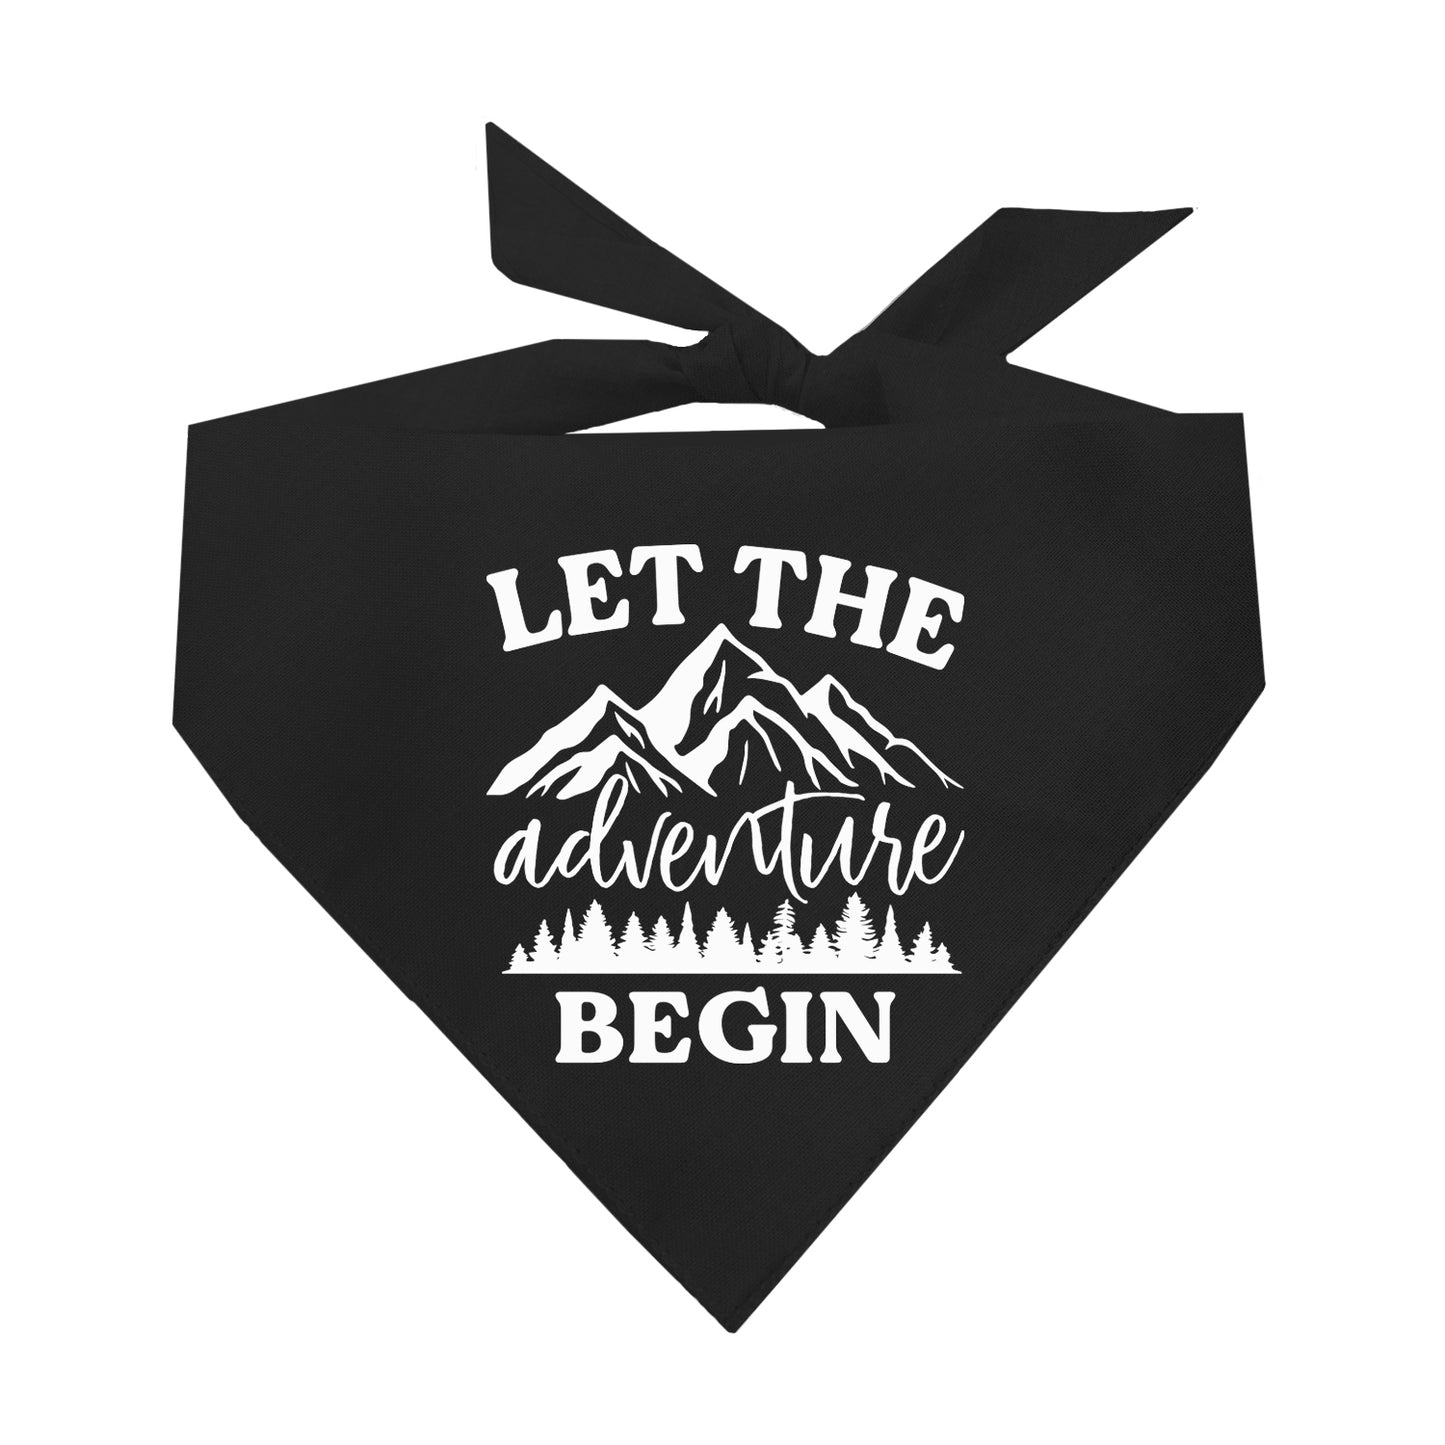 Let The Adventure Begin Triangle Dog Bandana (Assorted Colors)